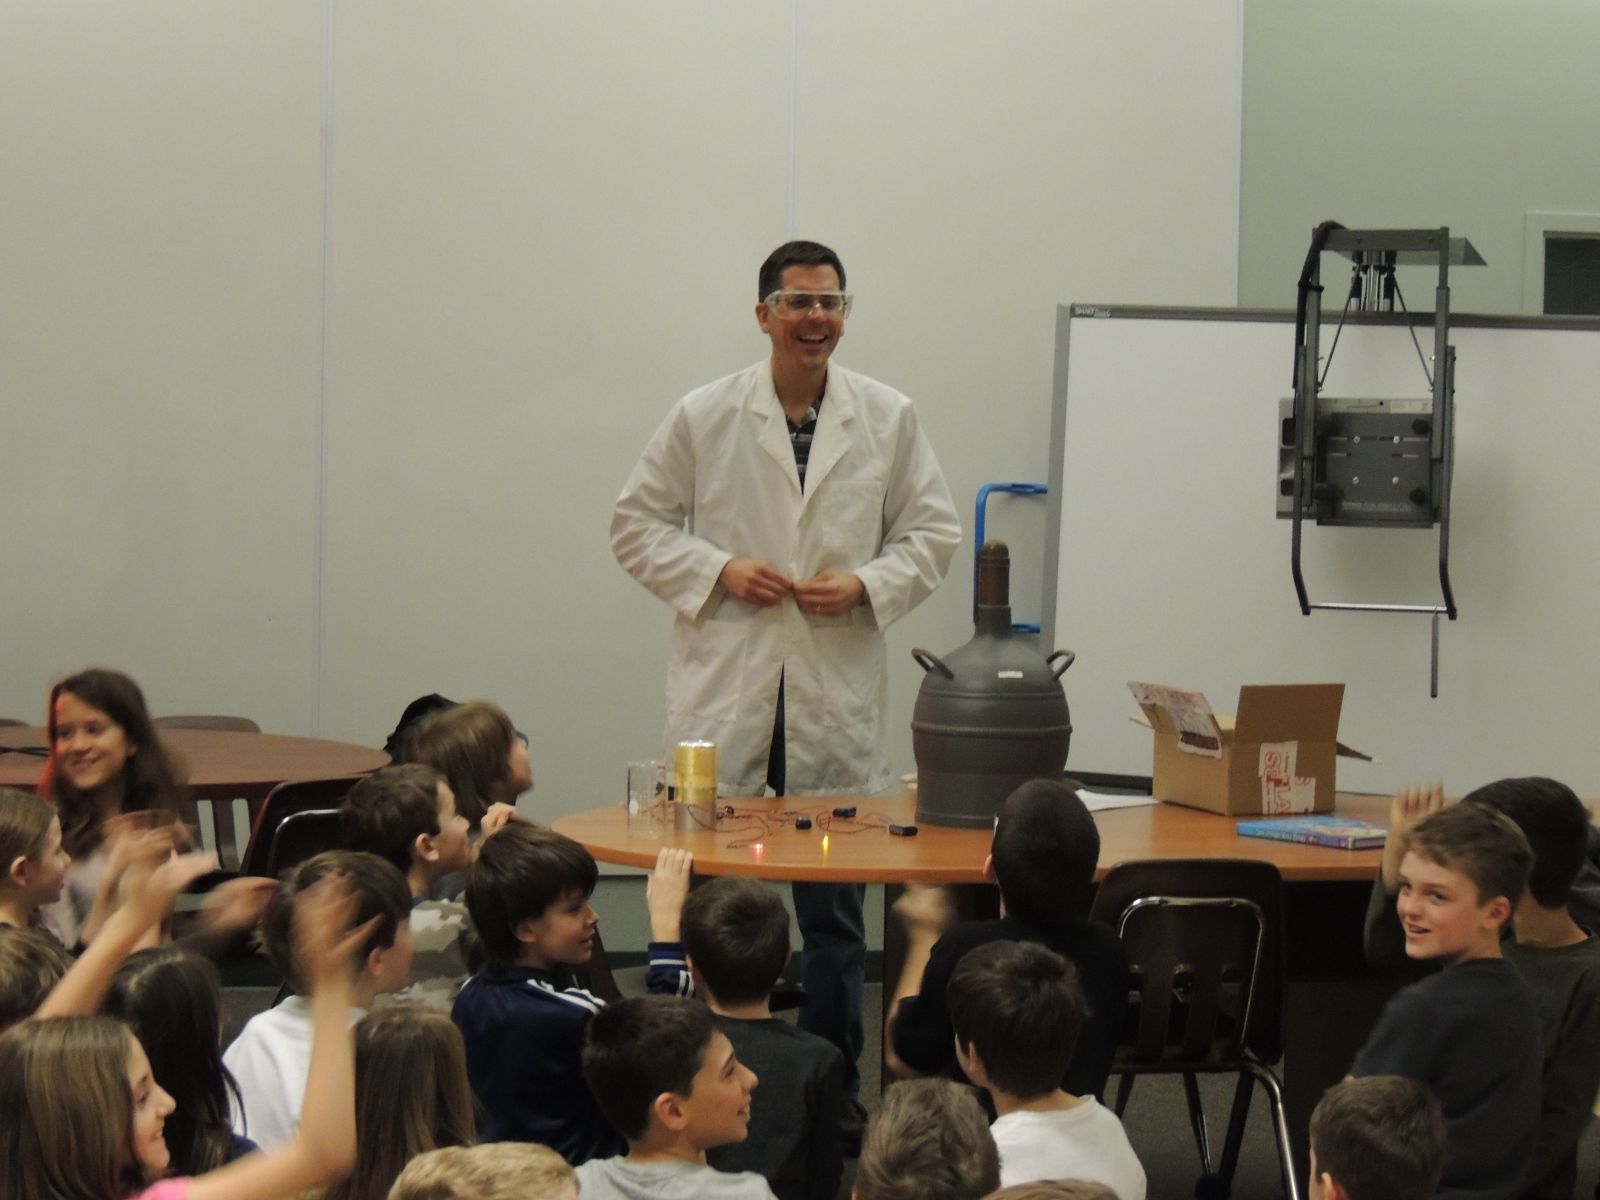 Dr Rehse visits 4th grade science students in class